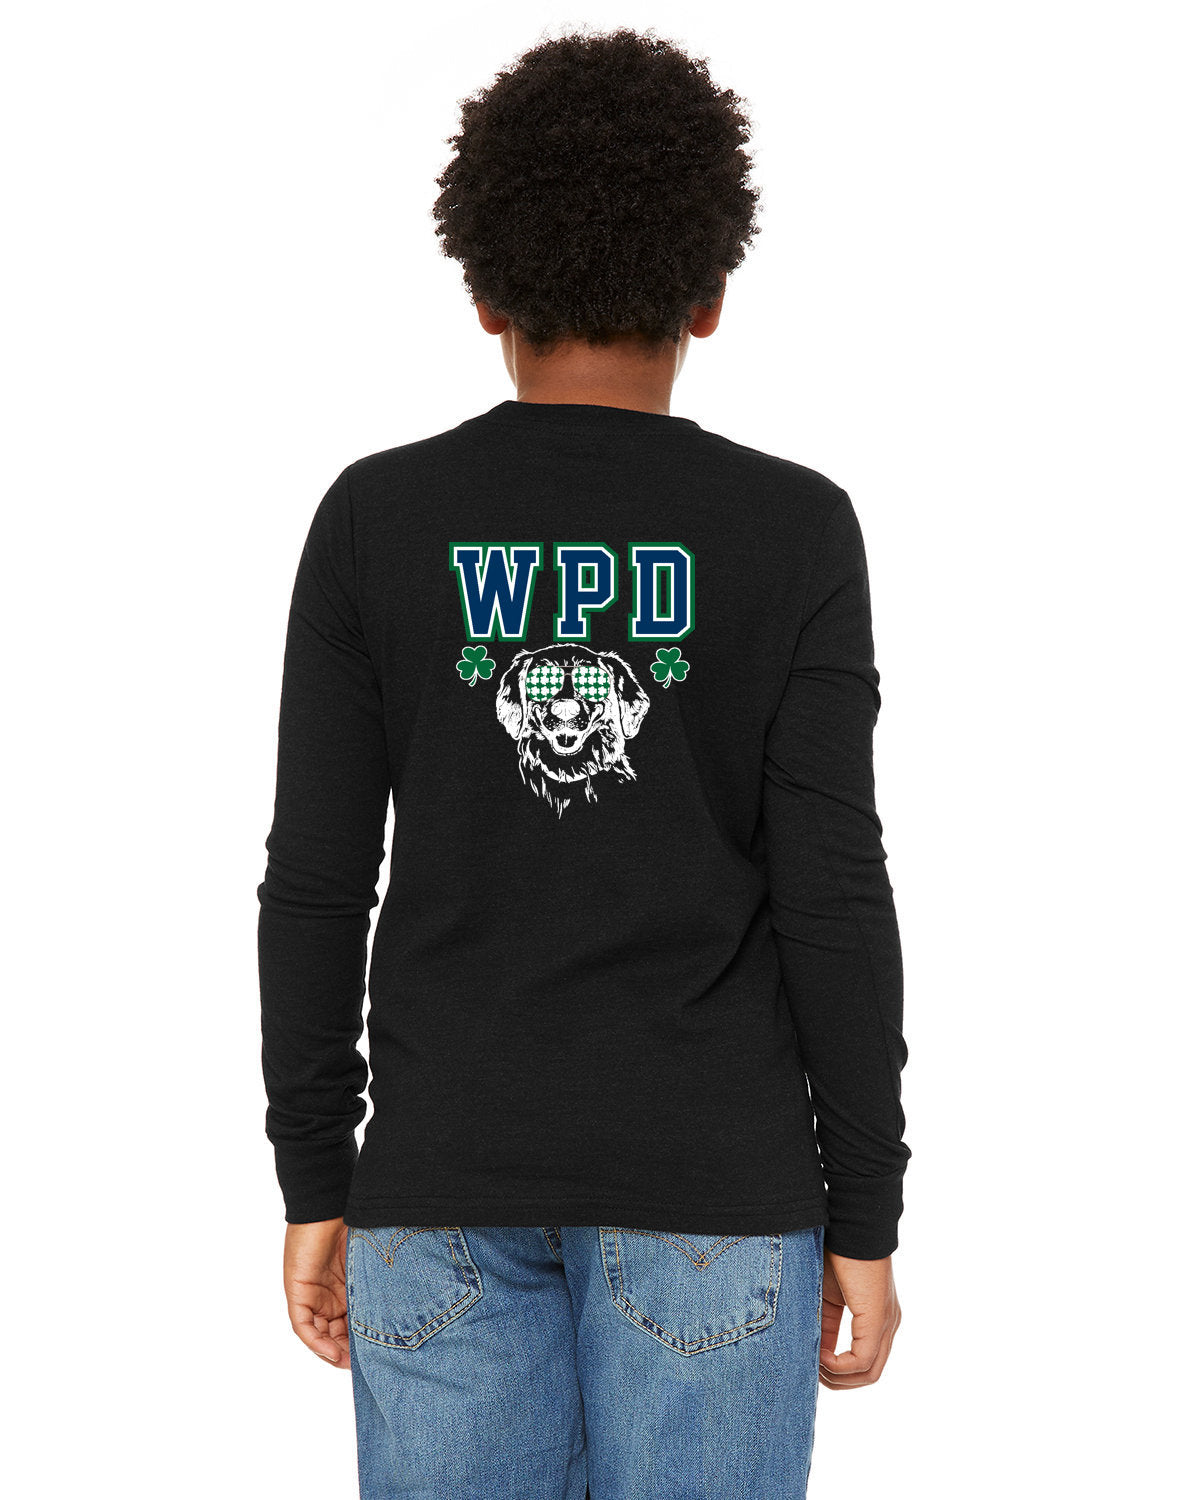 Walpole PD St. Patrick's Day 2024 LC Badge - Bella + Canvas Youth Heather Jersey Long-Sleeve T-Shirt - 3501Y